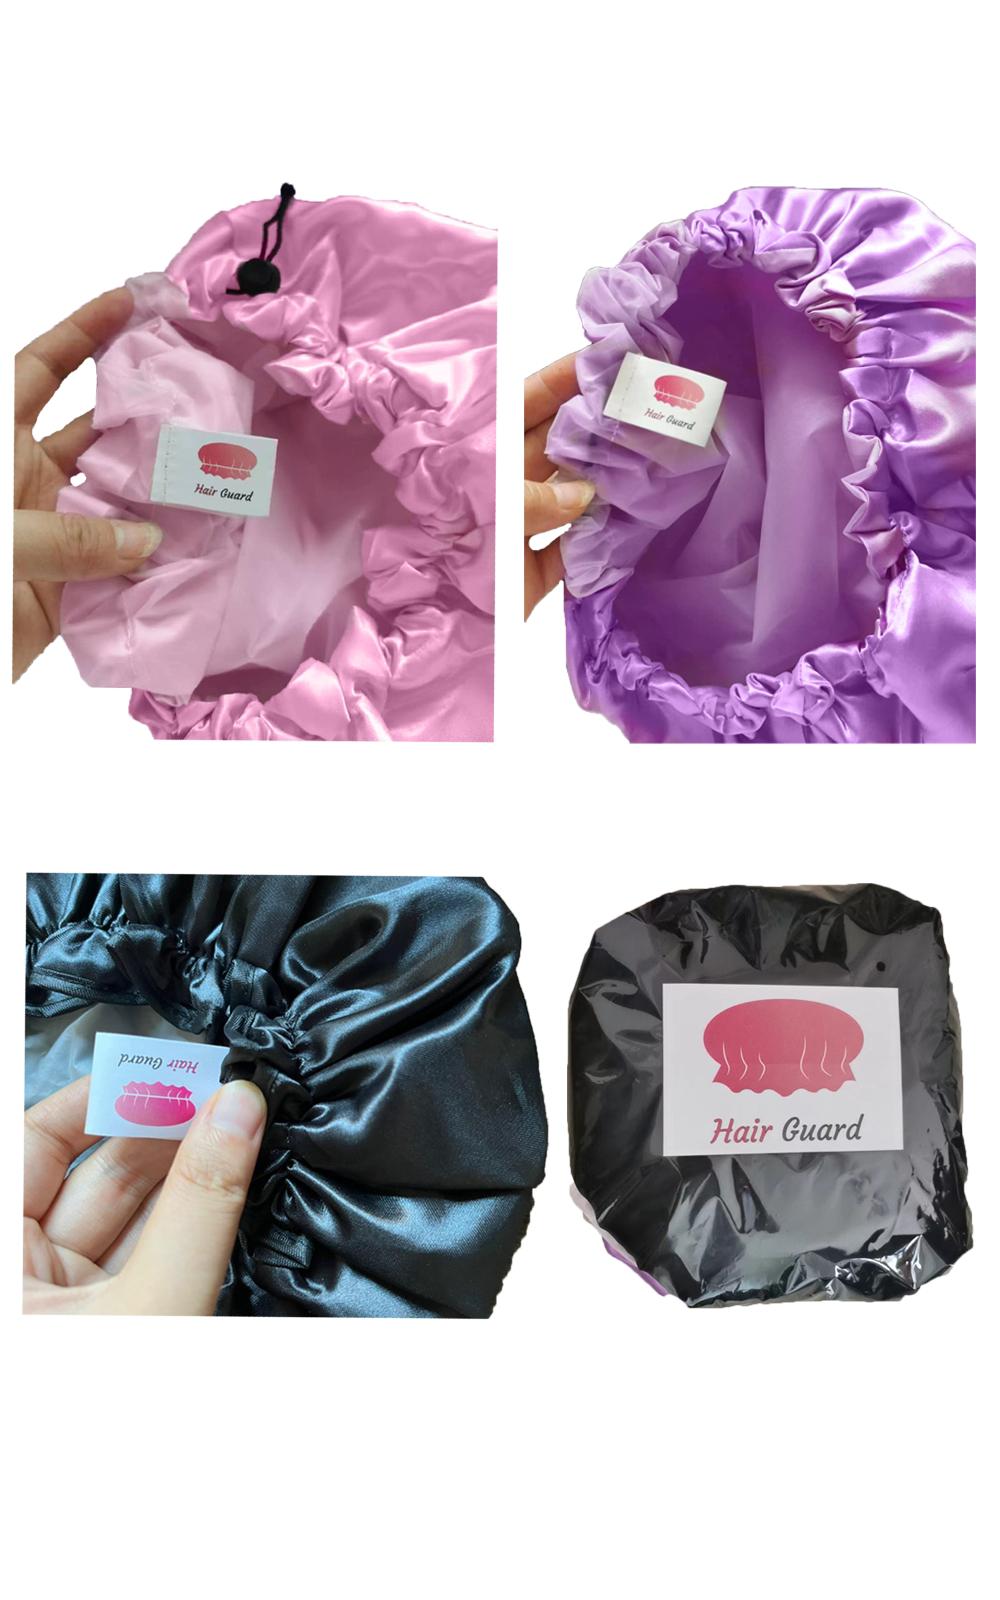 Hair Guard Reusable Shower Cap - Waterproof and Adjustable Shower Caps&nbsp; for Women and Men, Ideal for long and thick hair, Easily adjustable 3 pieces in 1 pack. (COLORS: BLACK, PINK, PURPLE)